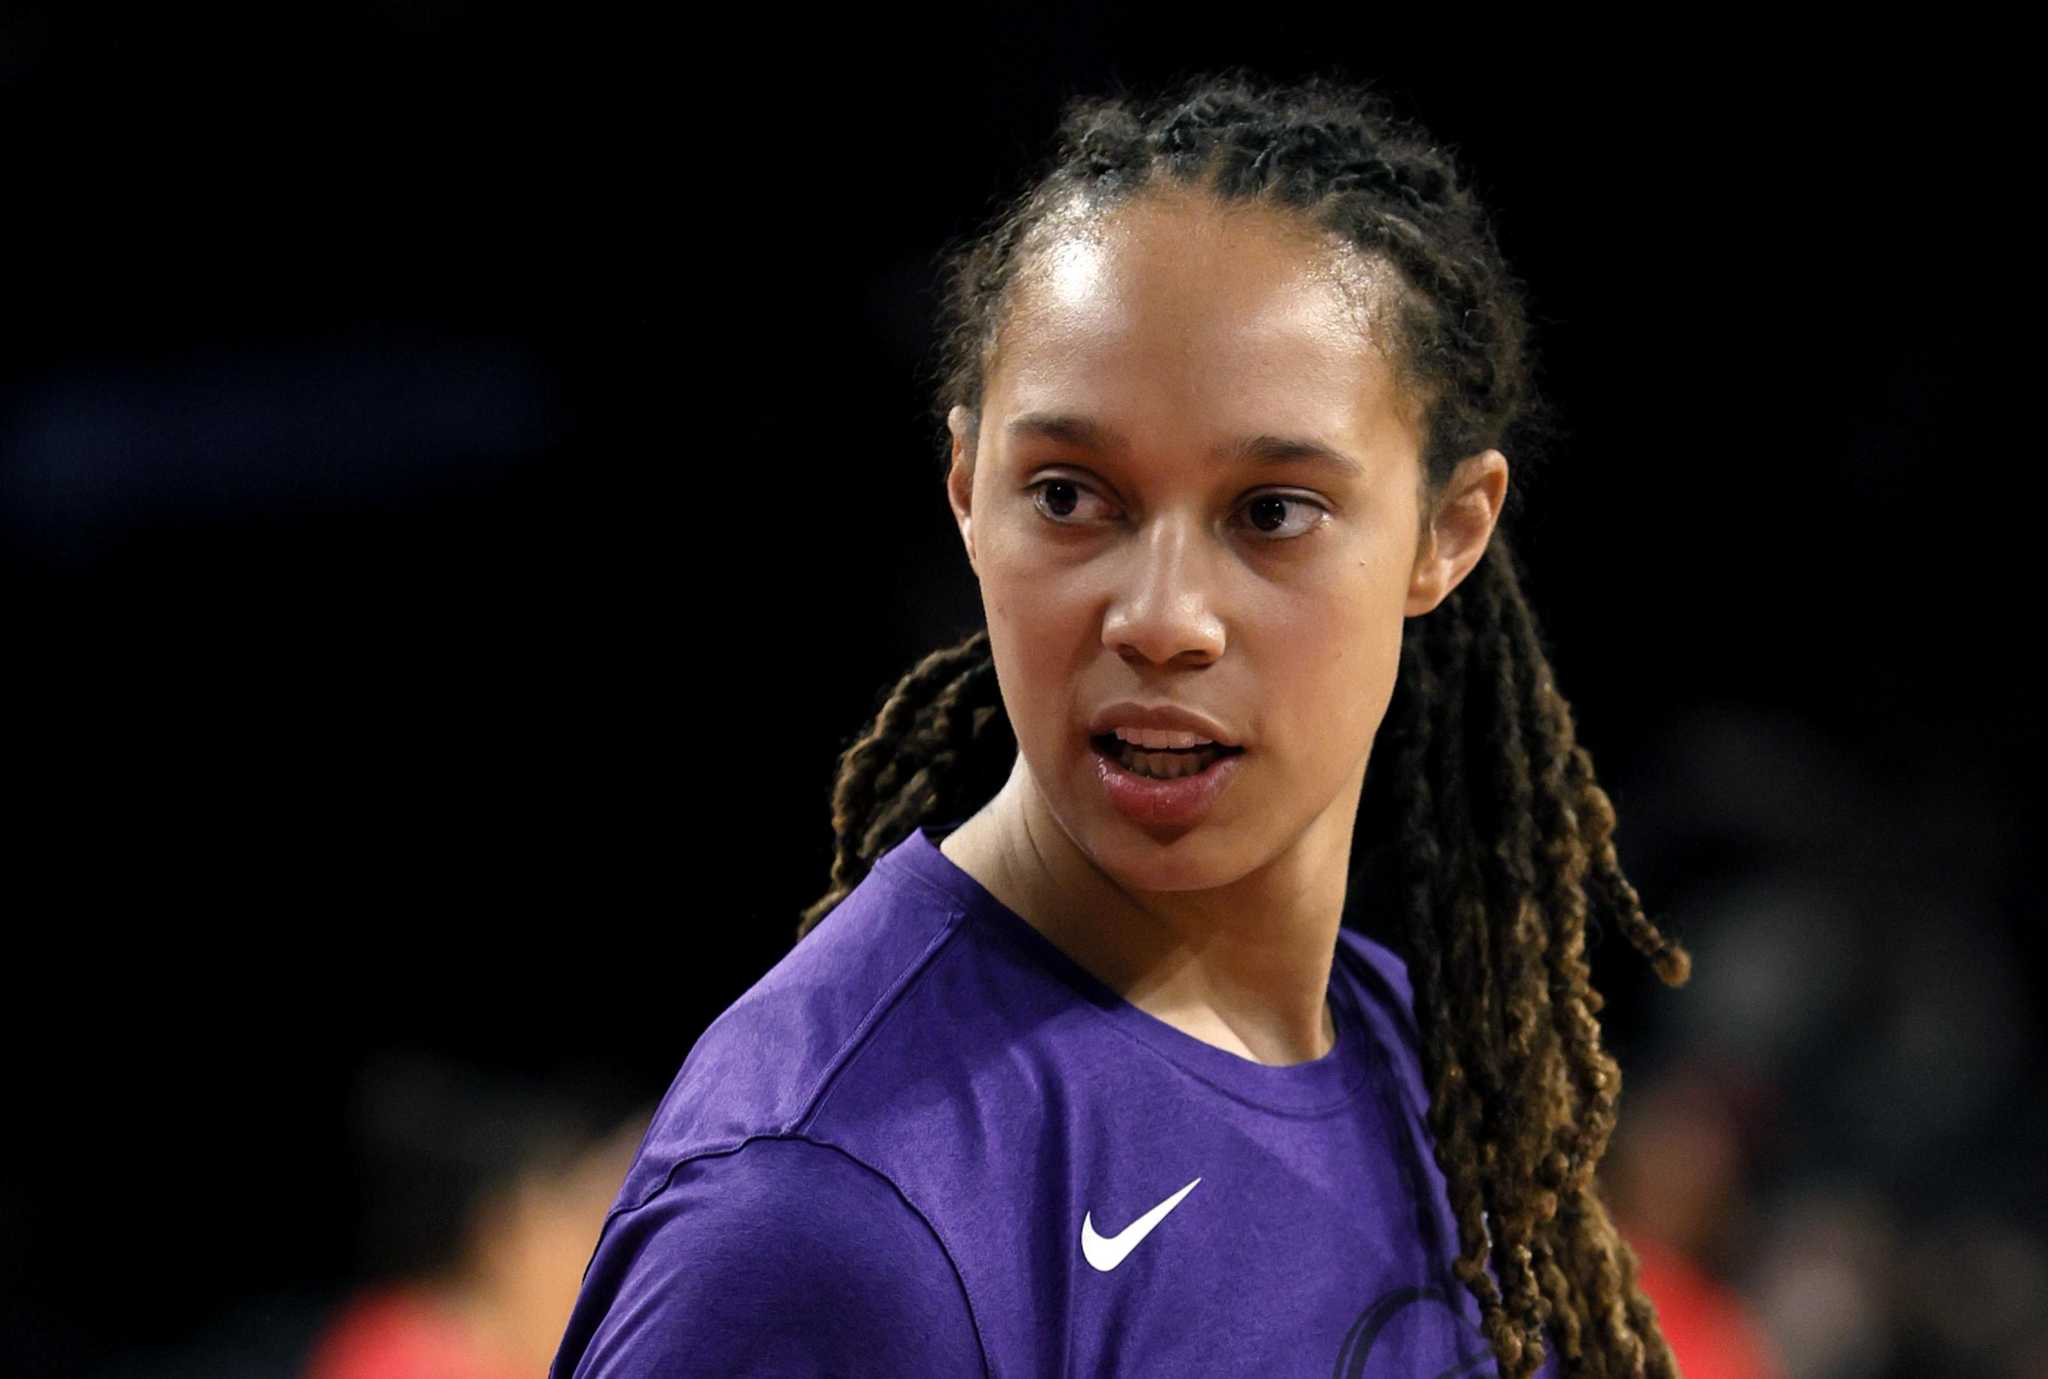 Wnba Star Houston Native Brittney Griner Arrested In Russia On Drug Charge Amid Geopolitical Tensions